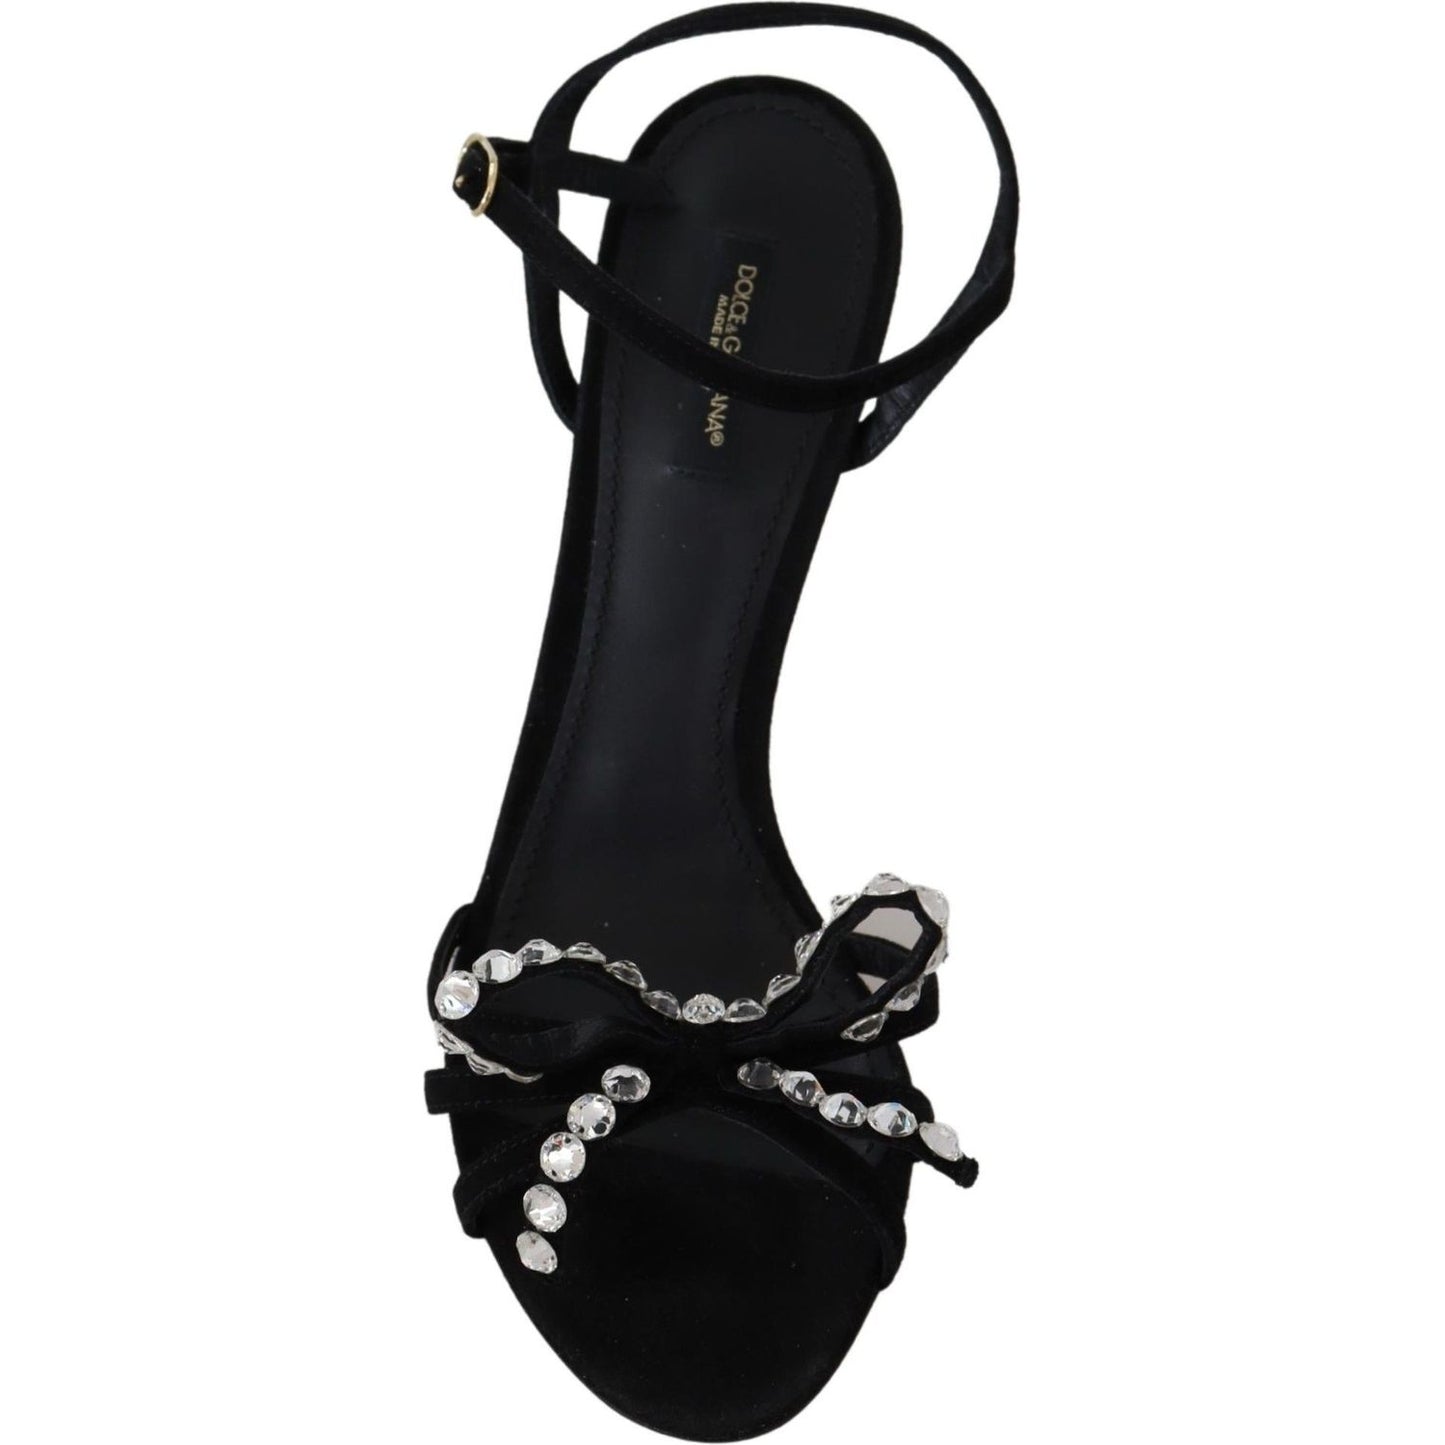 Dolce & Gabbana Elegant Suede High Sandals with Crystal Bows black-suede-crystals-heels-sandals-shoes